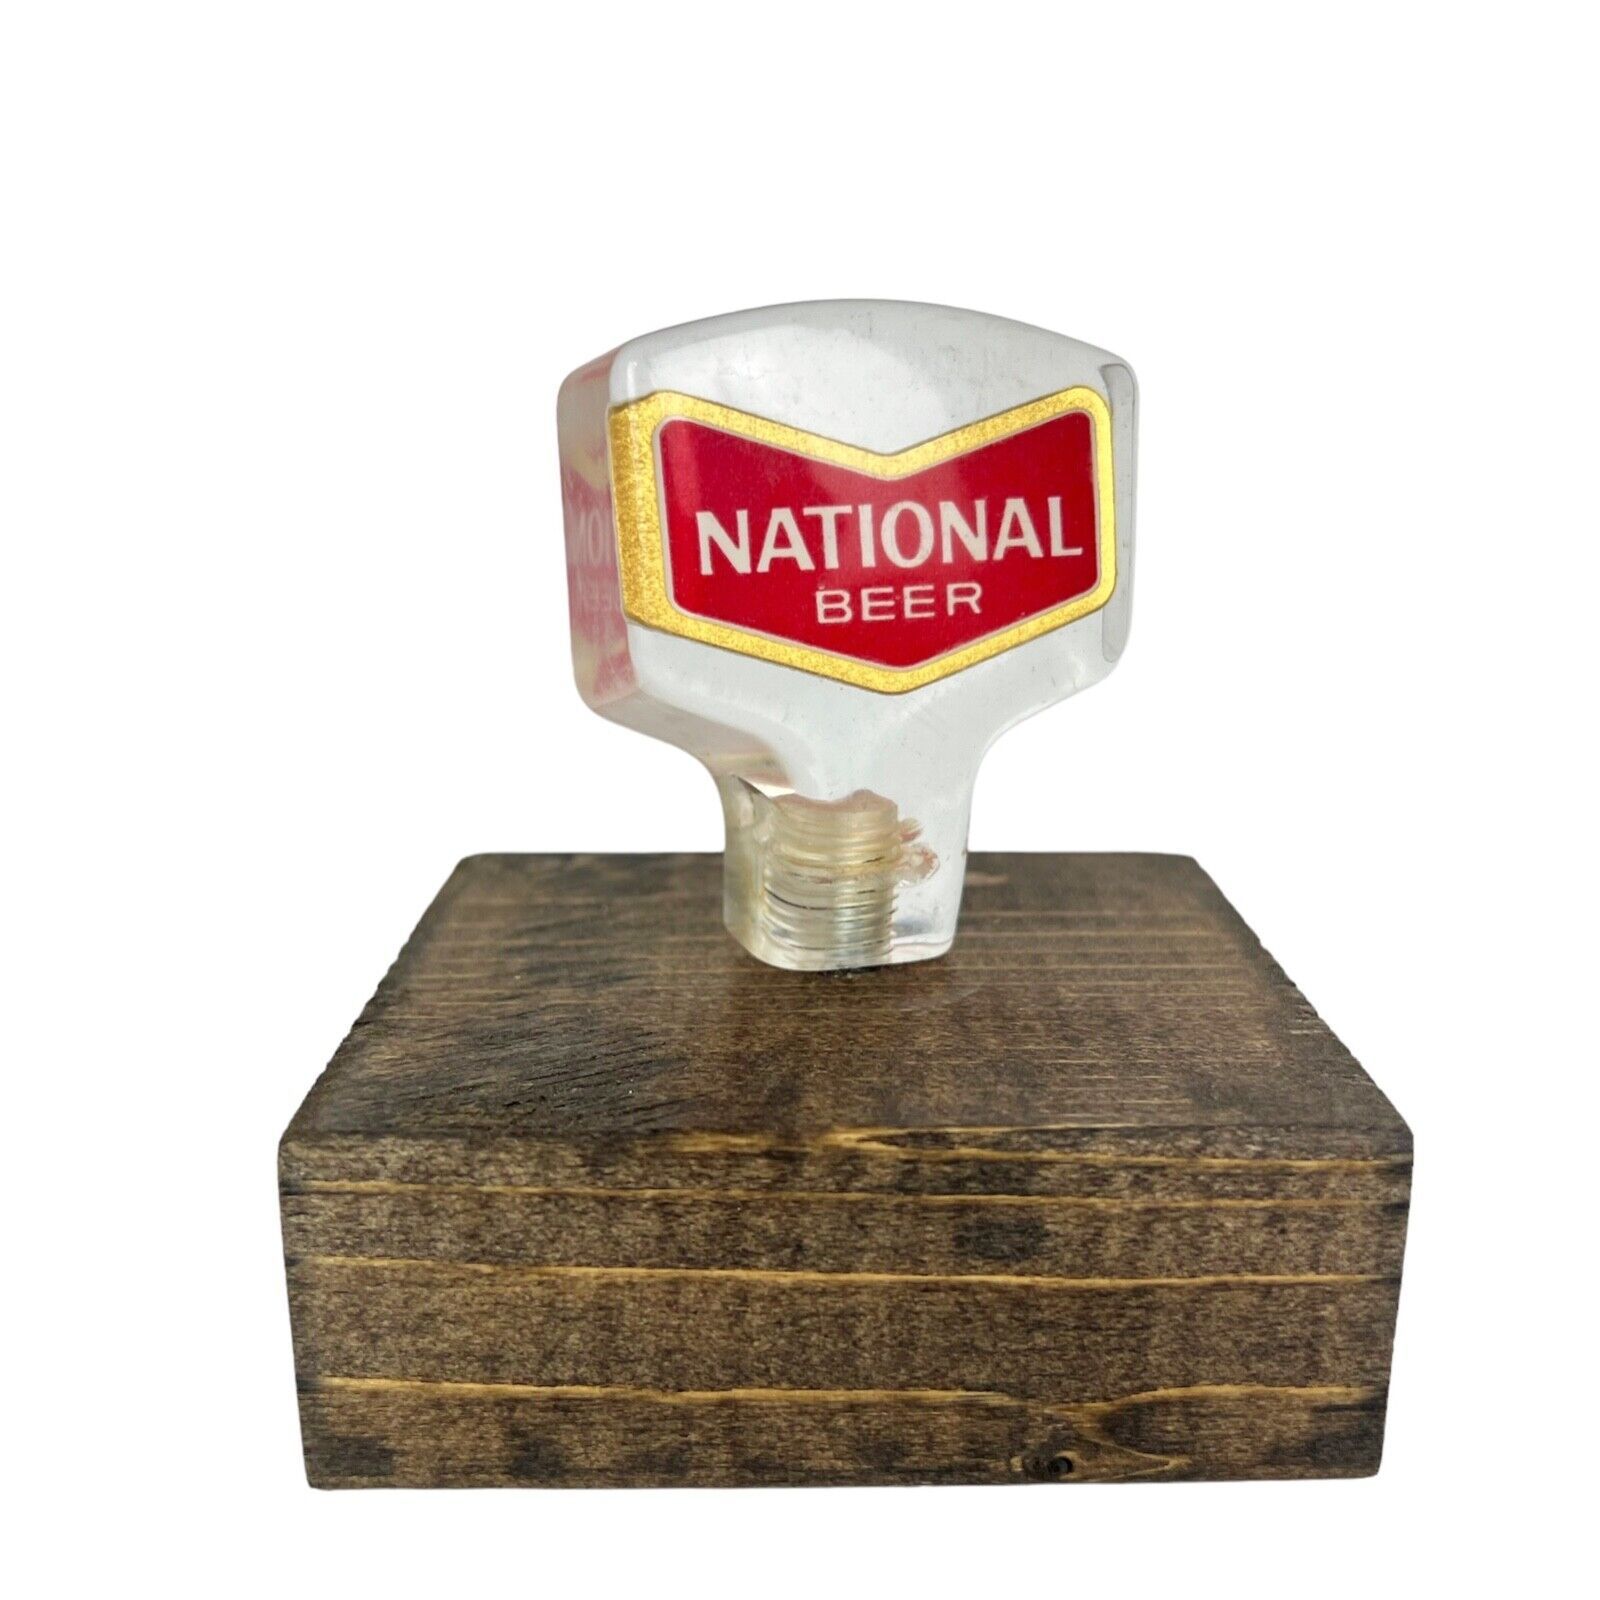 Primary image for Vintage National Beer Lucite Acrylic Short Mini Tap Handle Knob Baltimore MD